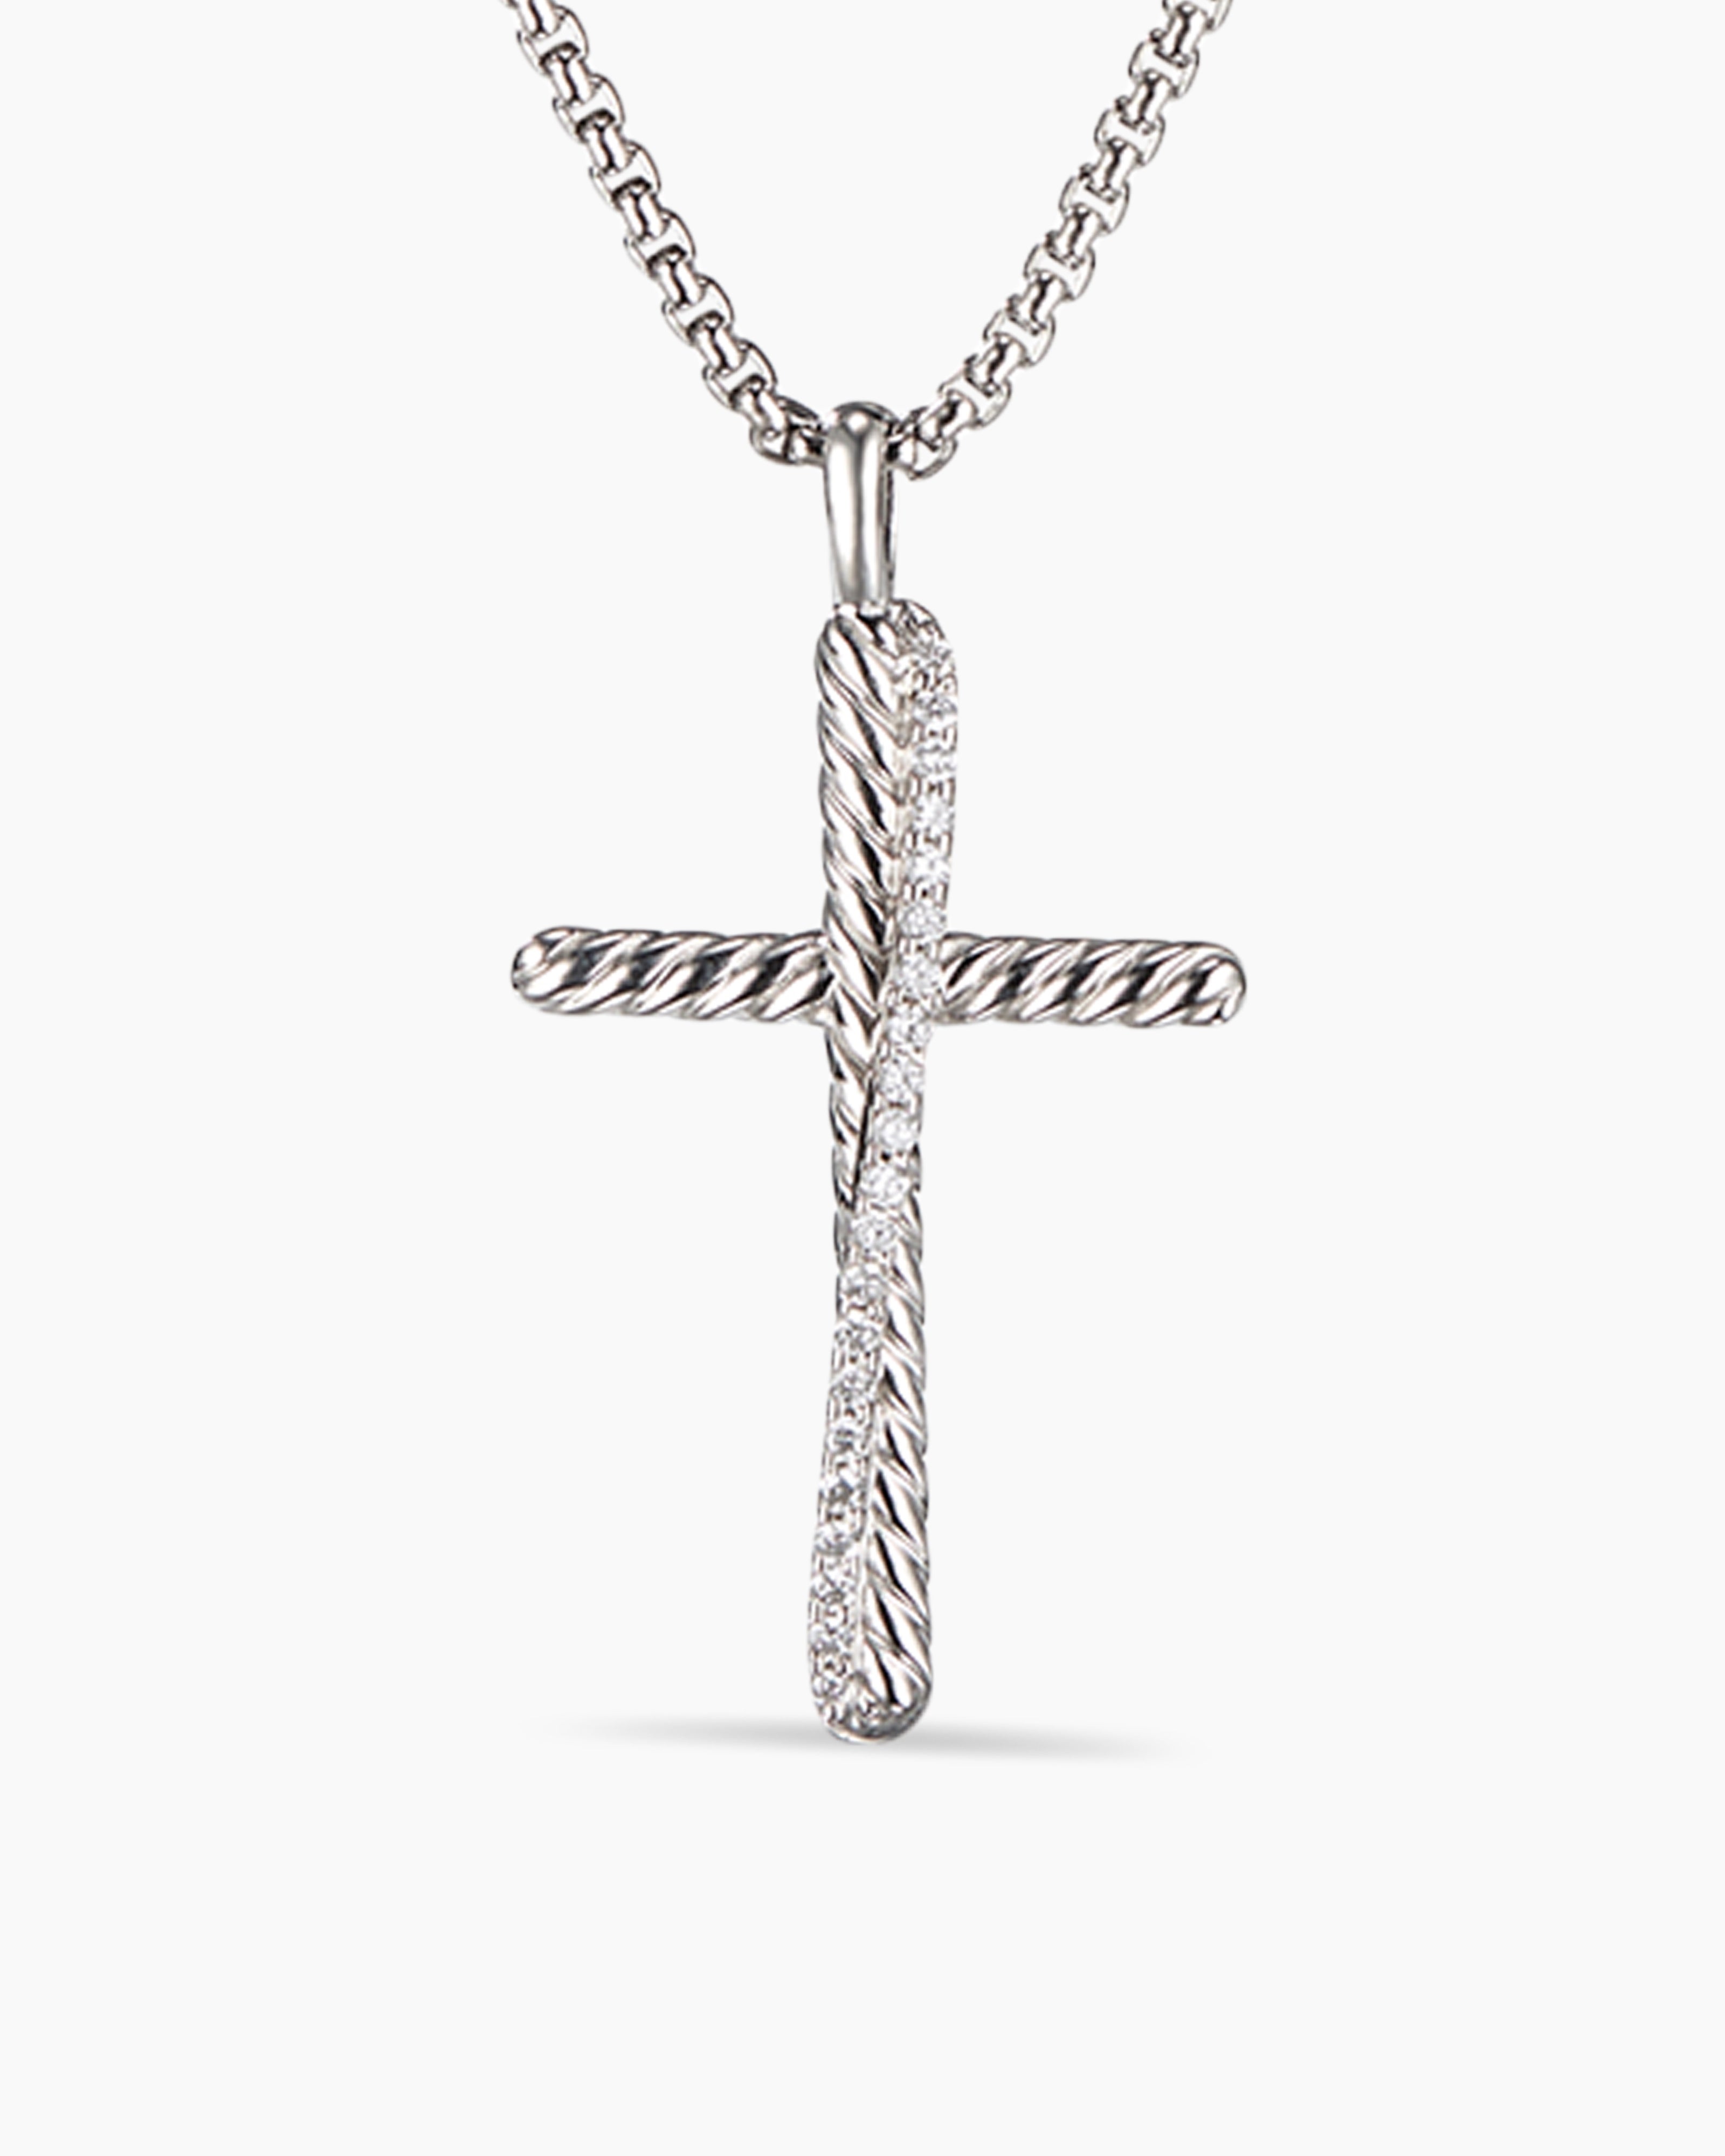 Cameido 925 Sterling Silver Cross Necklace for Men Women 4.5mm Stainless  Steel Highly Polished Cuban Link Chain 18K White Gold Plated Beveled Edge  Crucifix Cross Pendant Necklace 16 Inche | Amazon.com